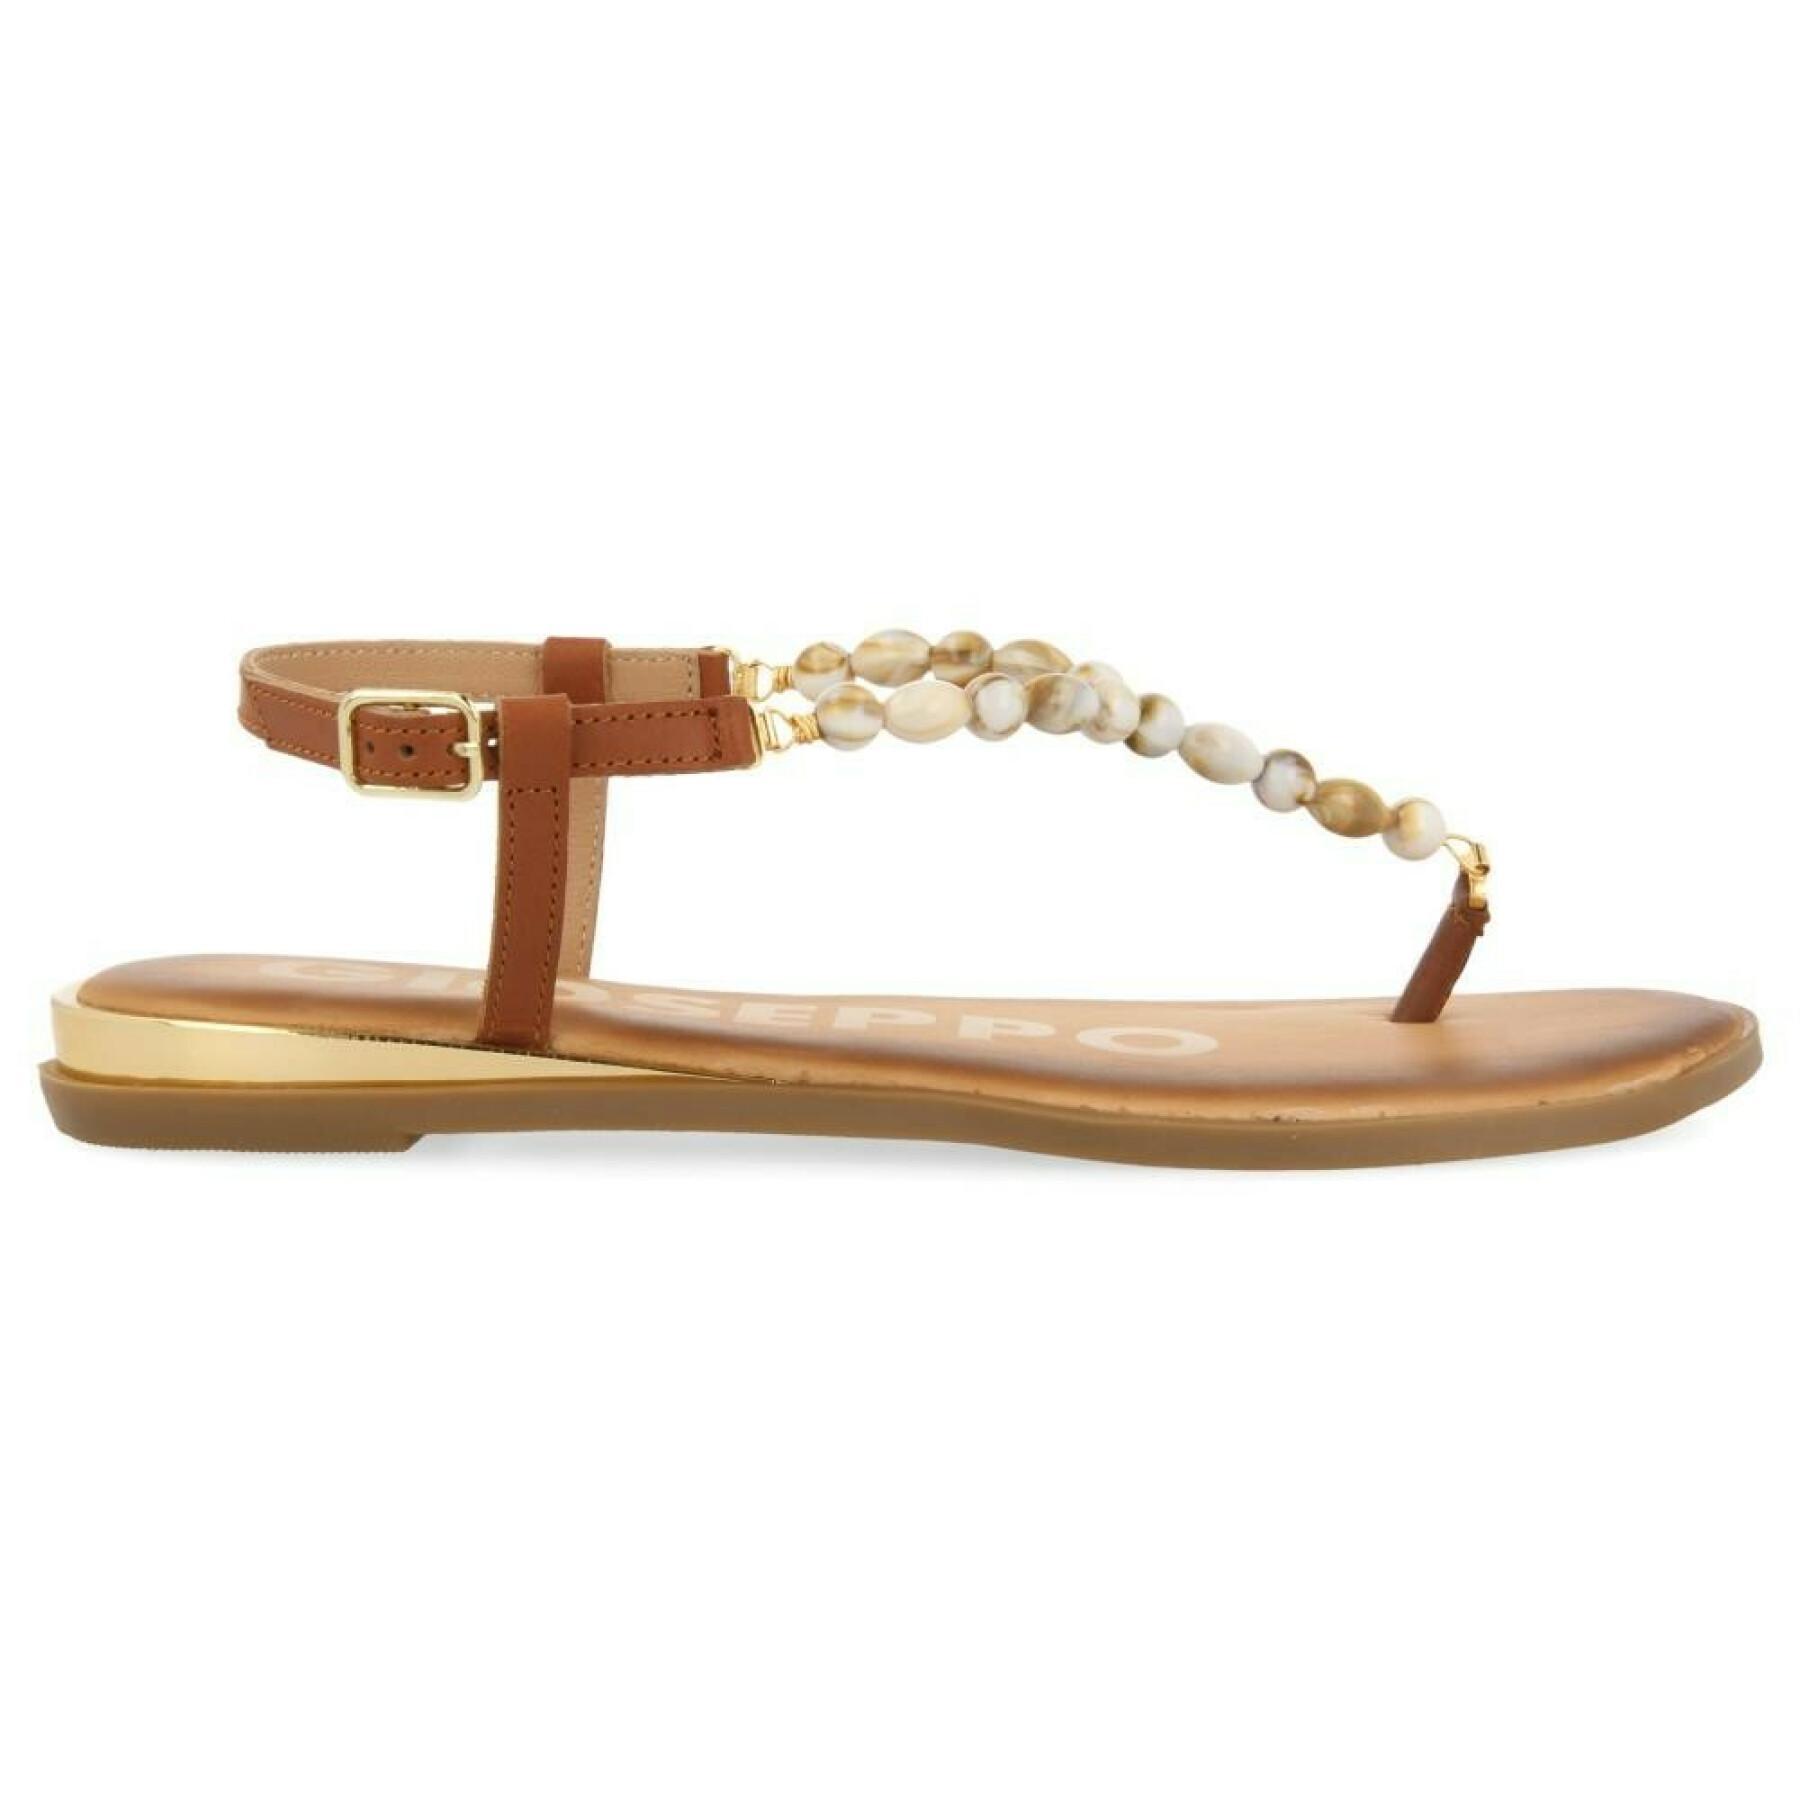 Women's sandals Gioseppo Wescan